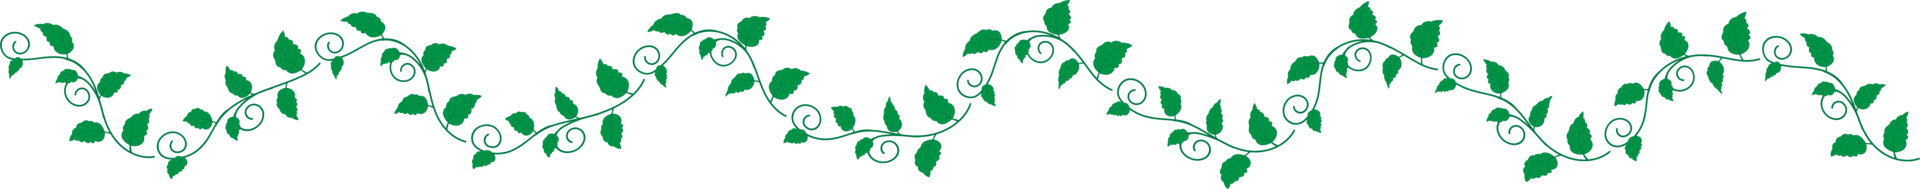 Ornament cutout with green leaves png